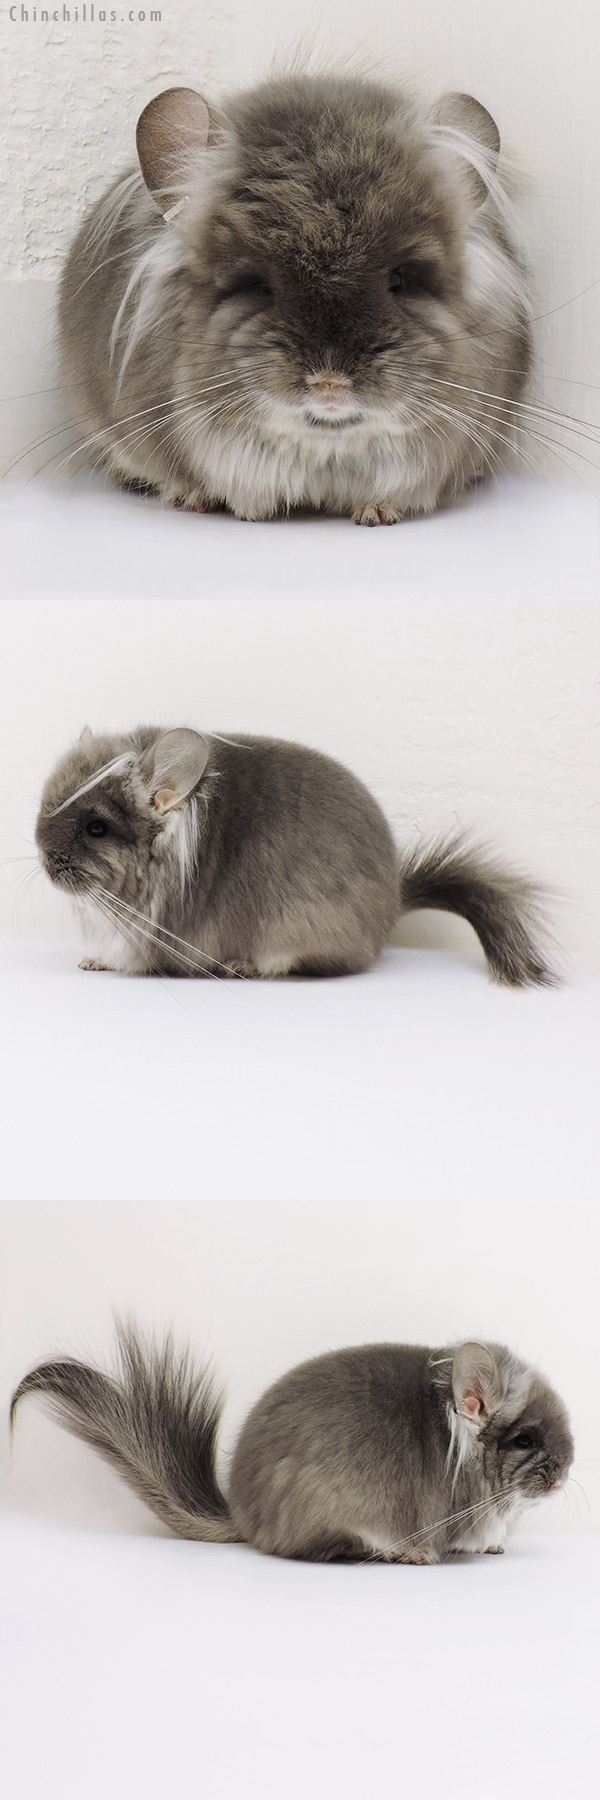 Chinchilla or related item offered for sale or export on Chinchillas.com - 16197 Exceptional Brevi Type TOV Violet G2  Royal Persian Angora Male Chinchilla with Long Ear Tendrils